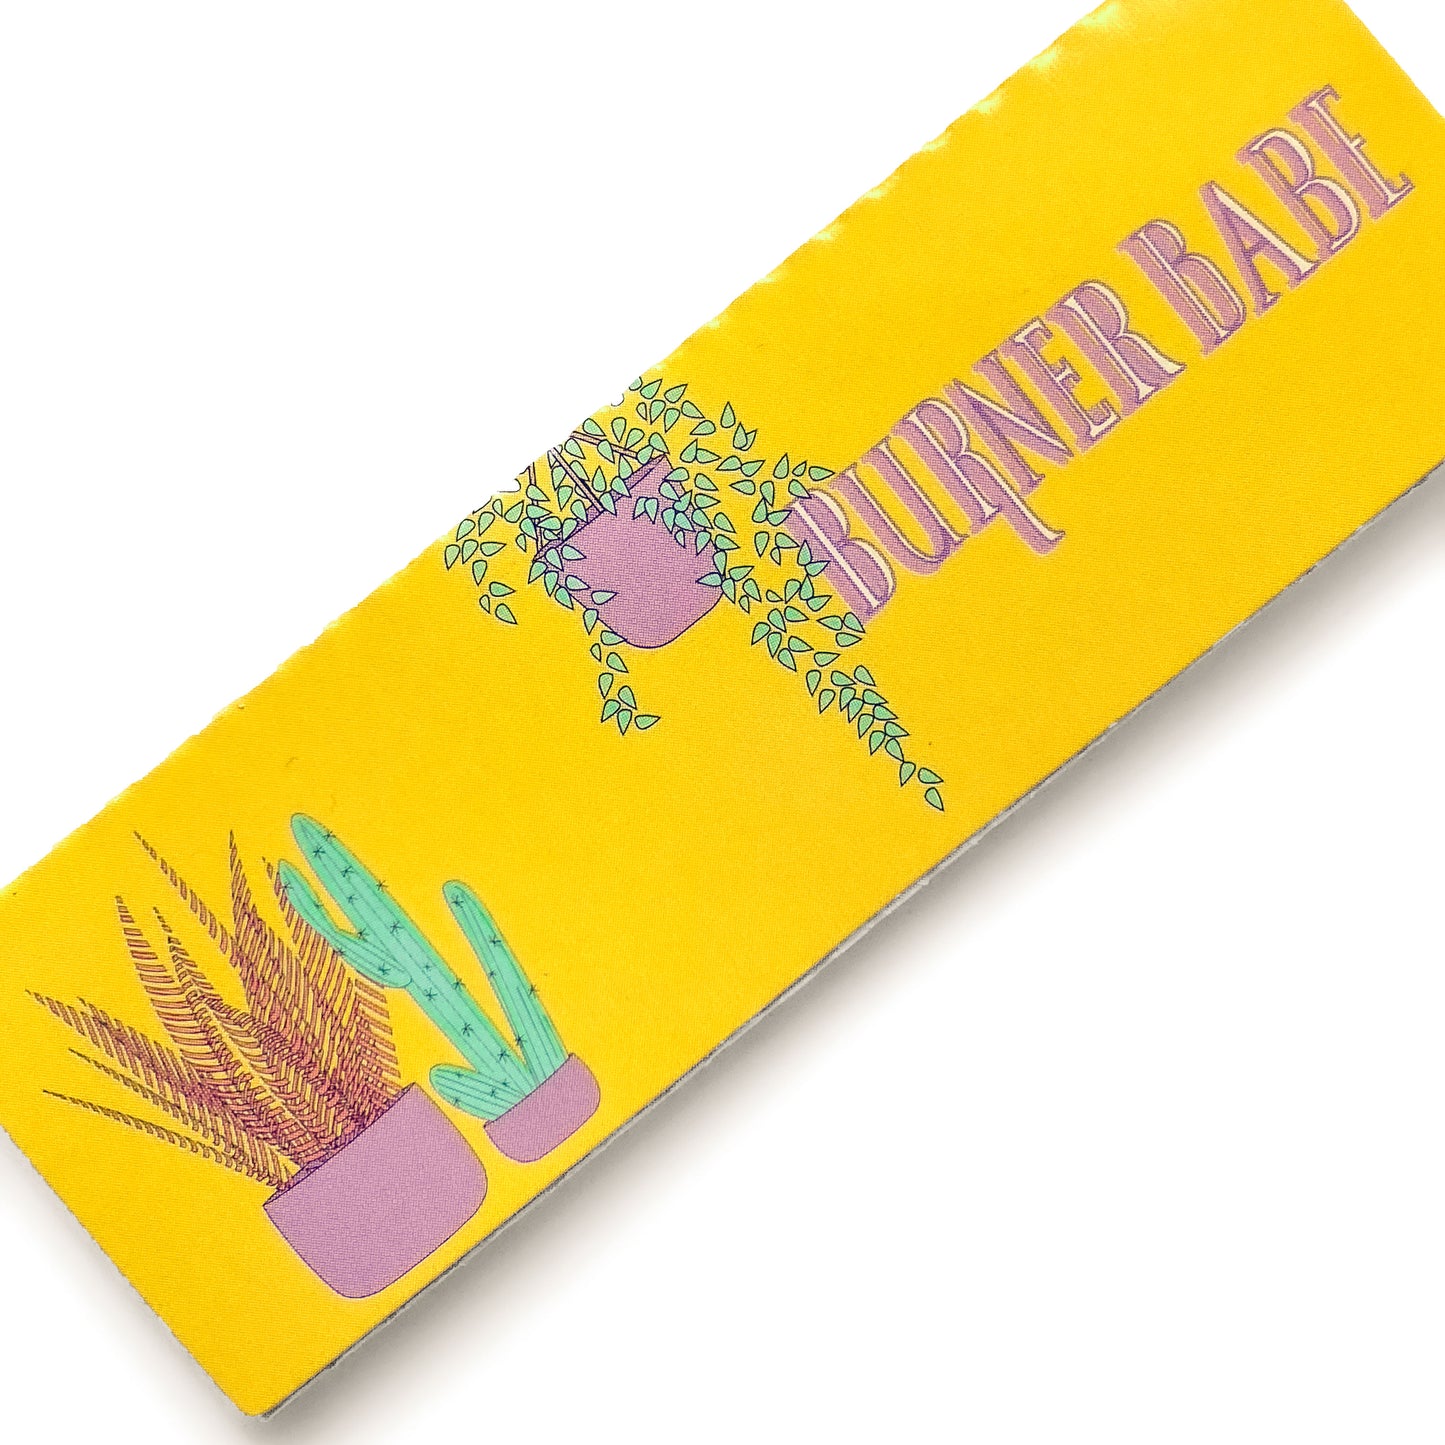 Wallflower rolling papers: wallpaper inspired floral rolling papers. These designer rolling papers are girly, pretty, vegan, cute, cool, standard size, high quality, even burn, natural dyes, best tasting, slow burn.